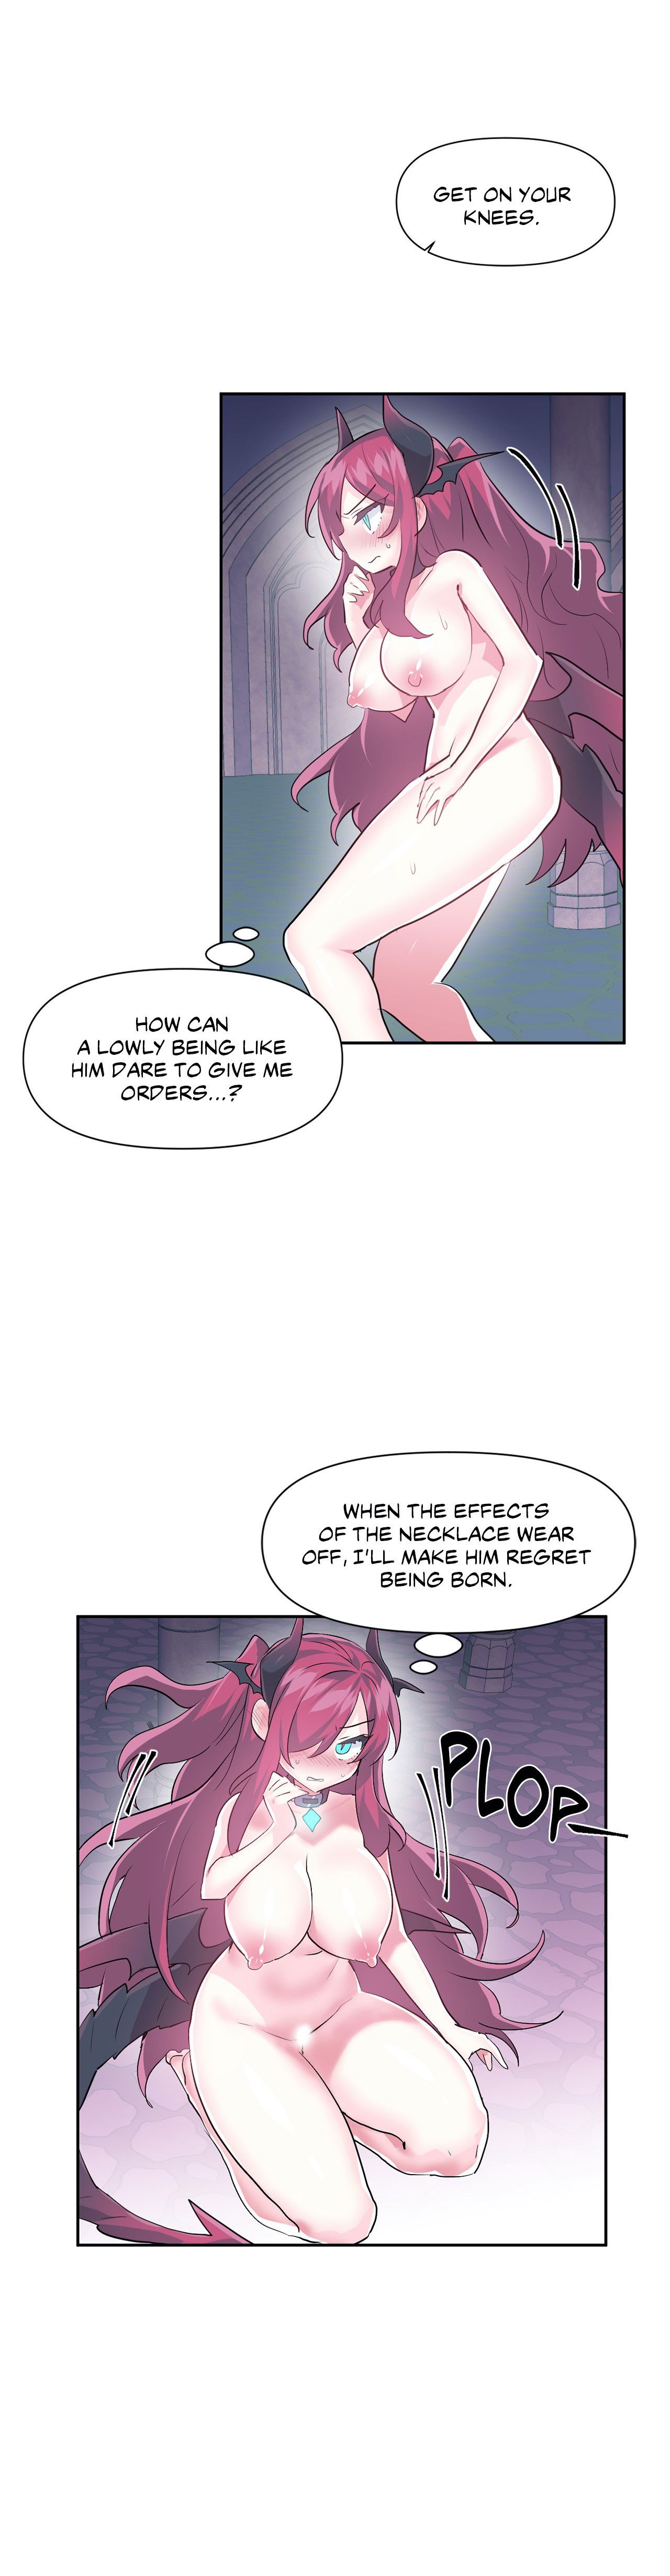 log-in-to-lust-a-land-chap-41-23